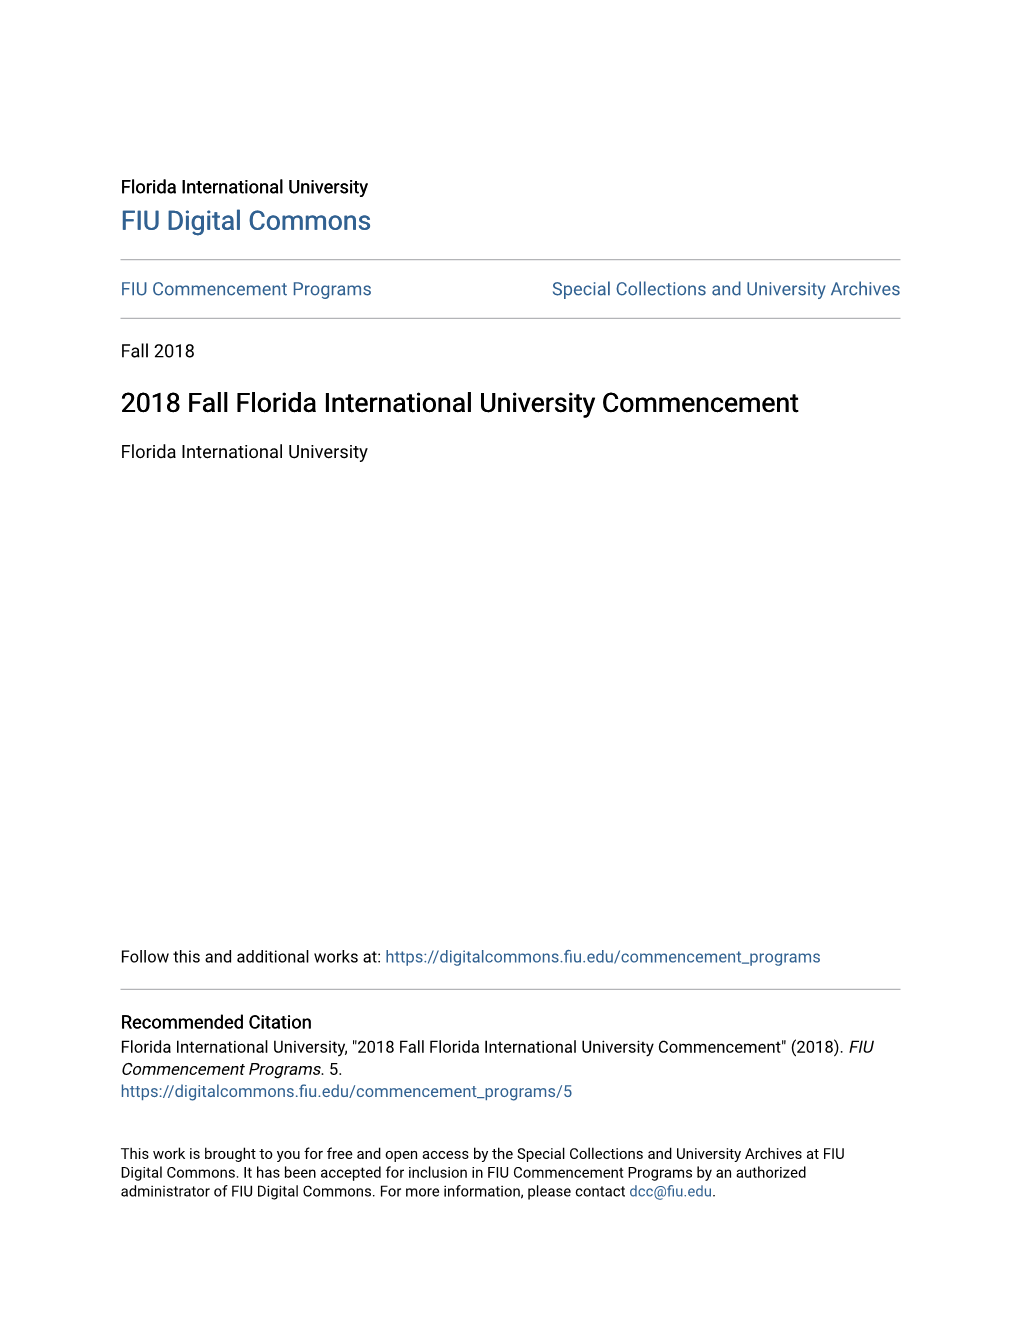 FIU Commencement Fall 2018